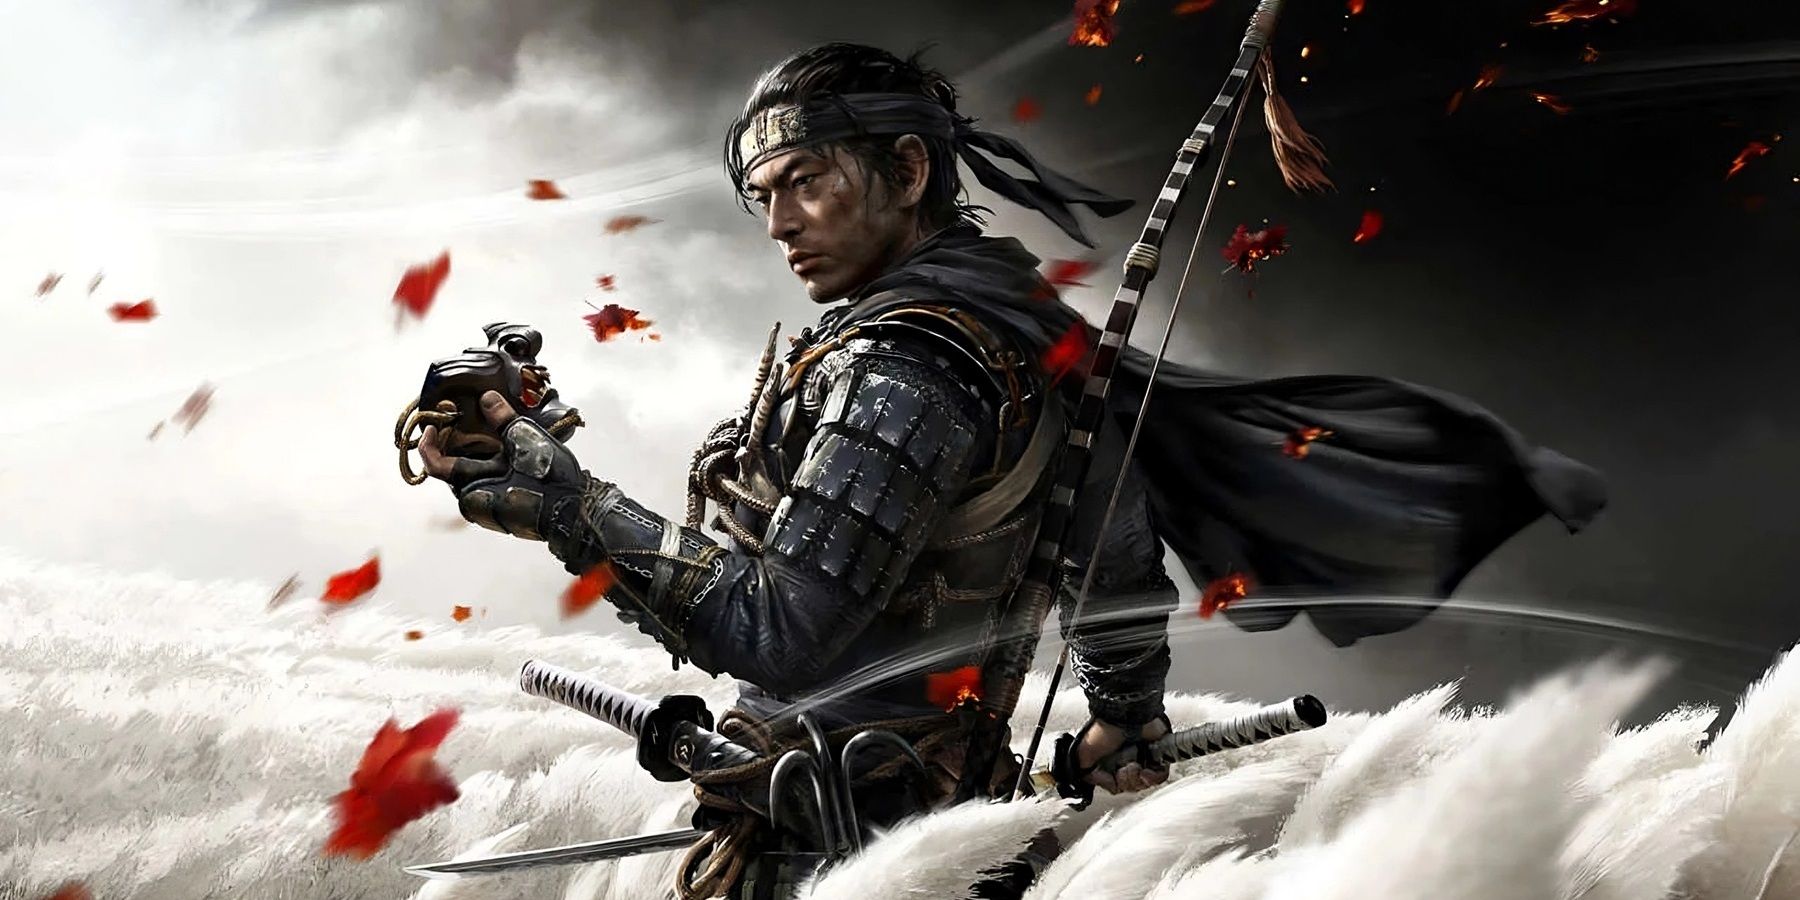 rumor-ghost-of-tsushima-2-reveal-could-be-happening-soon